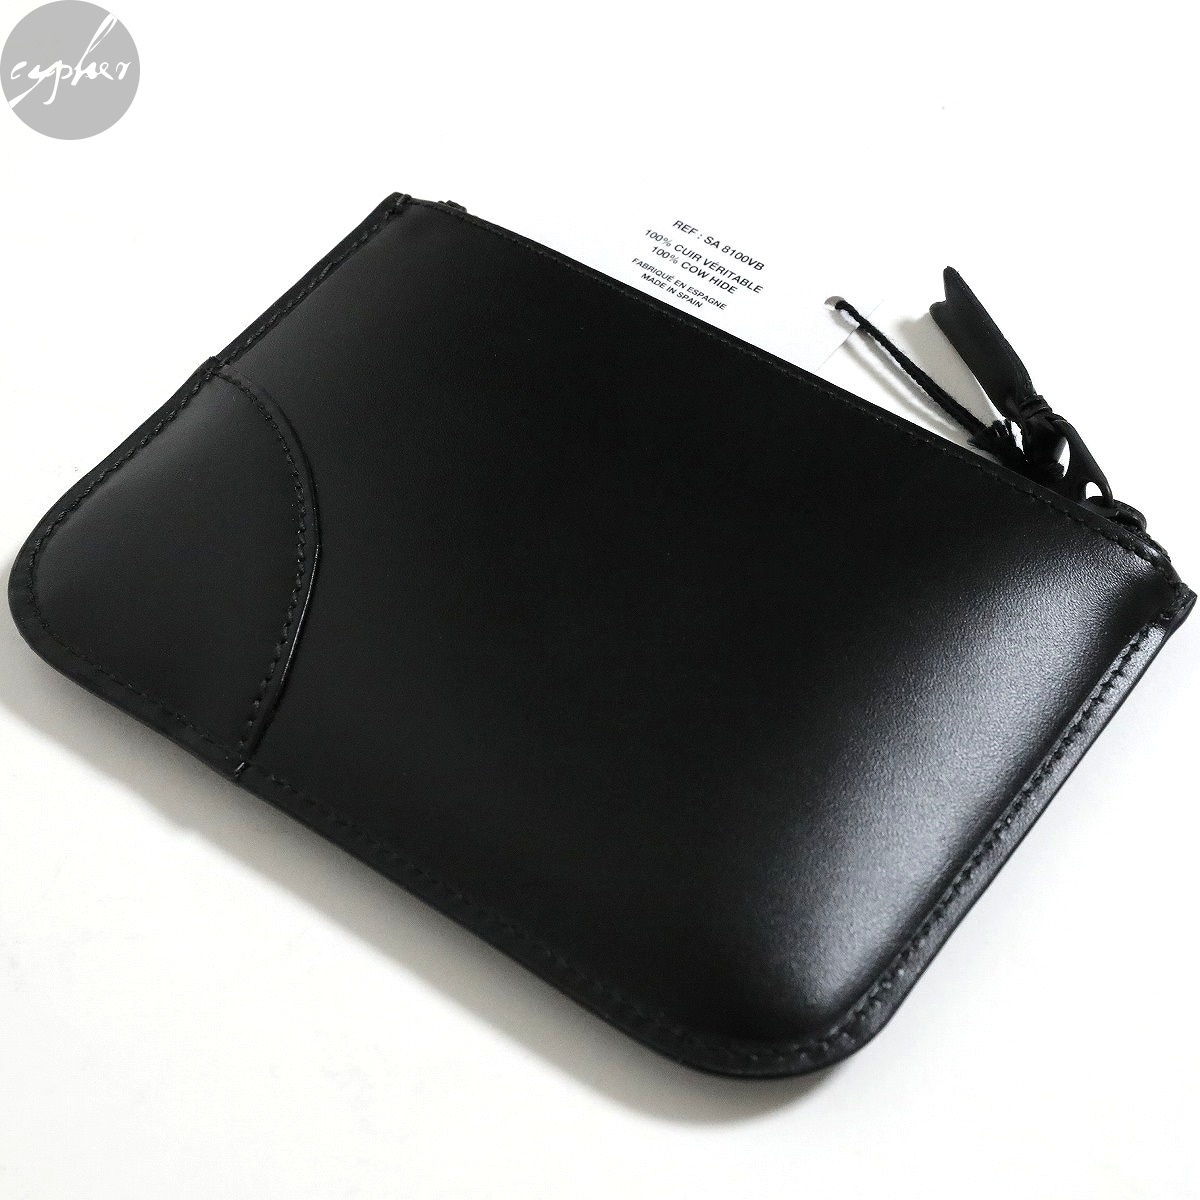  new goods Comme des Garcons wallet SA8100VB Berry black WALLET purse leather . inserting card inserting change purse . coin case pouch black 